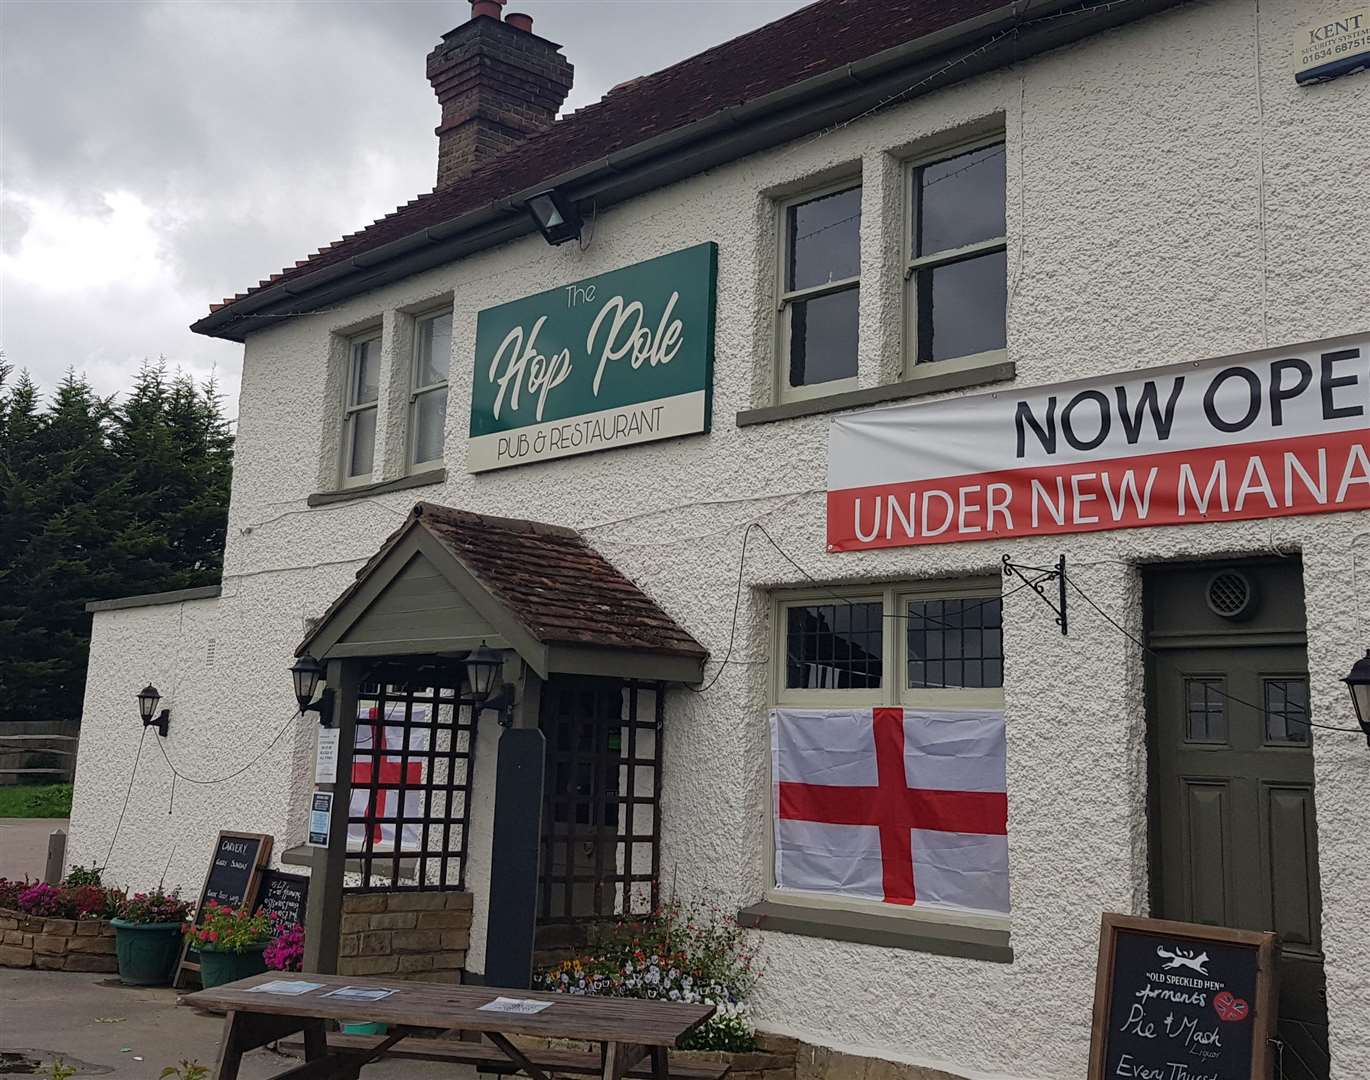 Like many pubs in the country, The Hop Pole Inn is decked out in England flags for Euro 2020